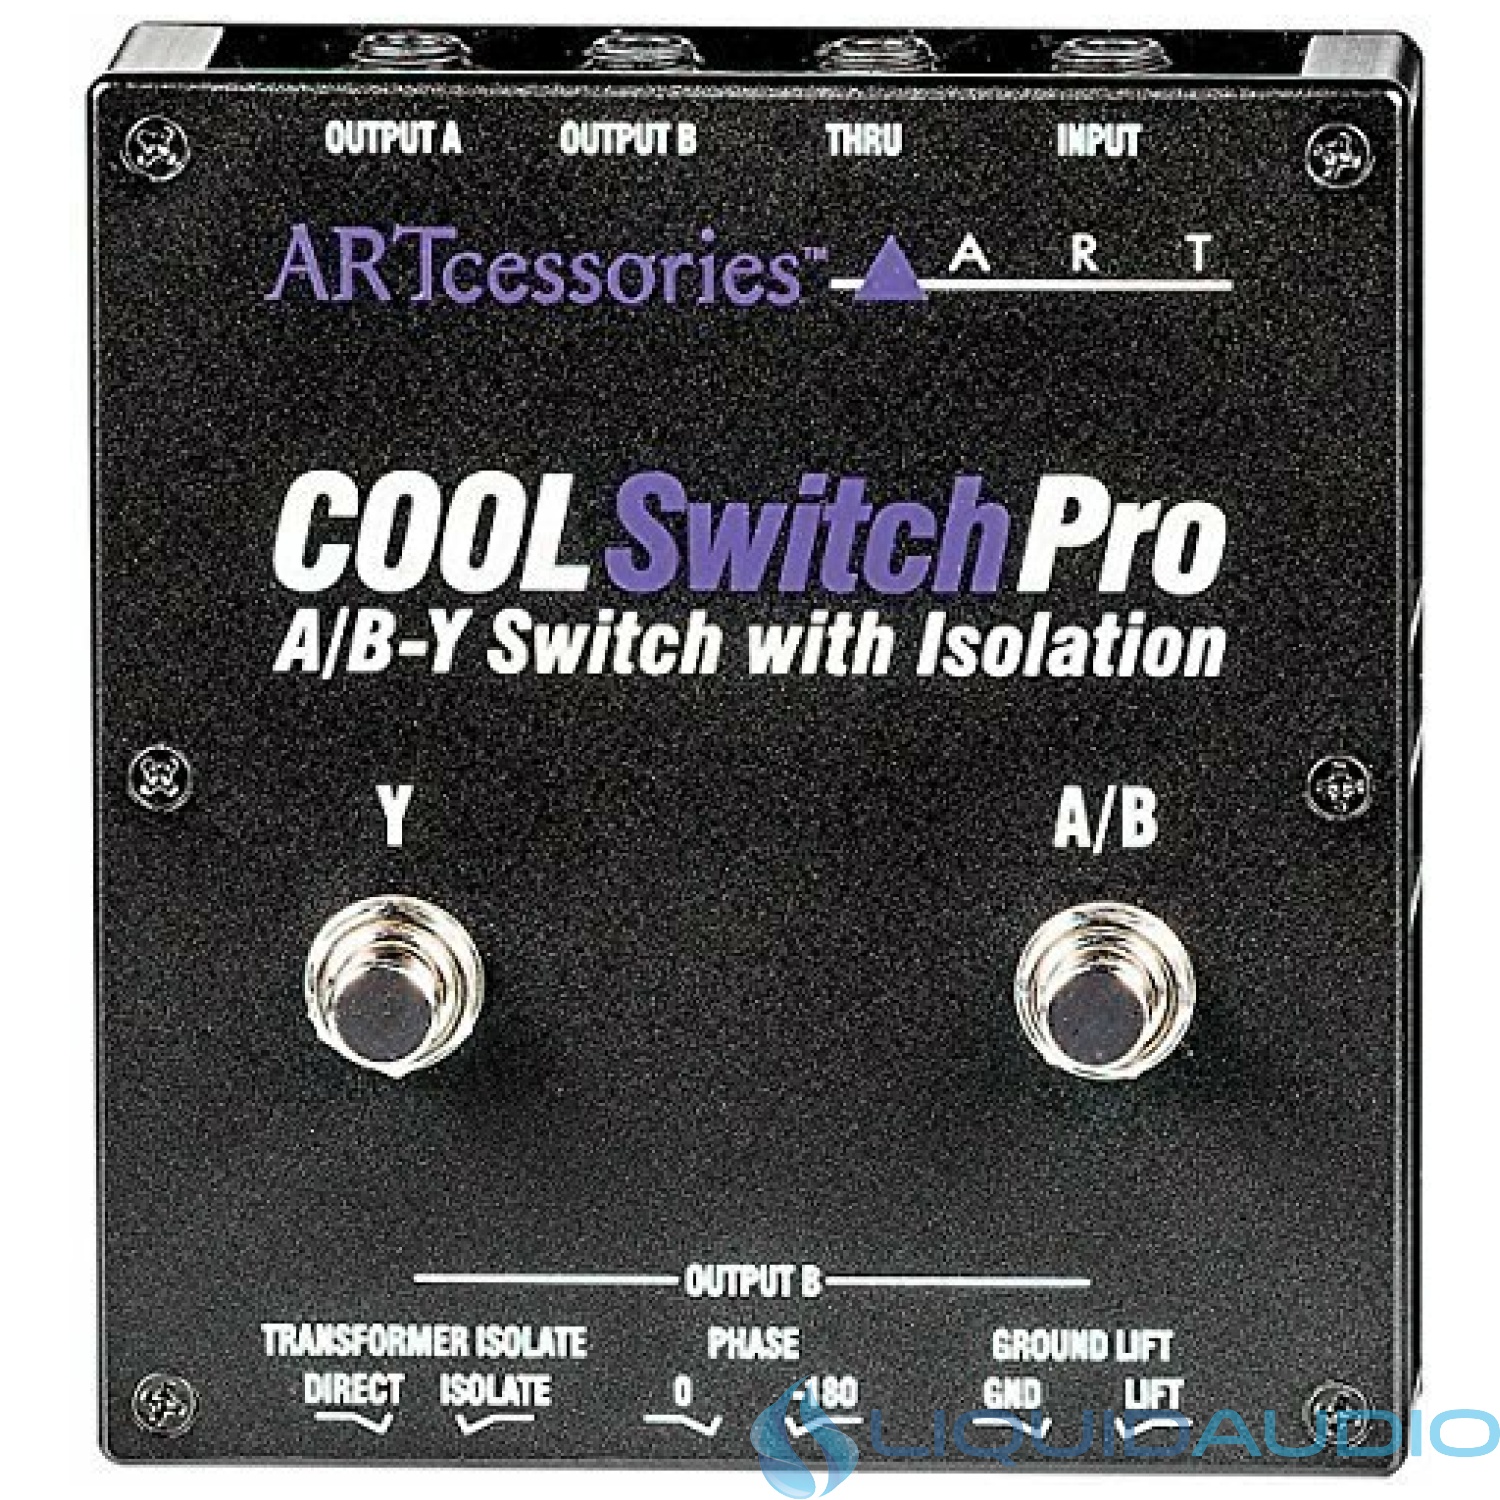 ART Cool Switch Pro A/B-Y Switch with Isolation